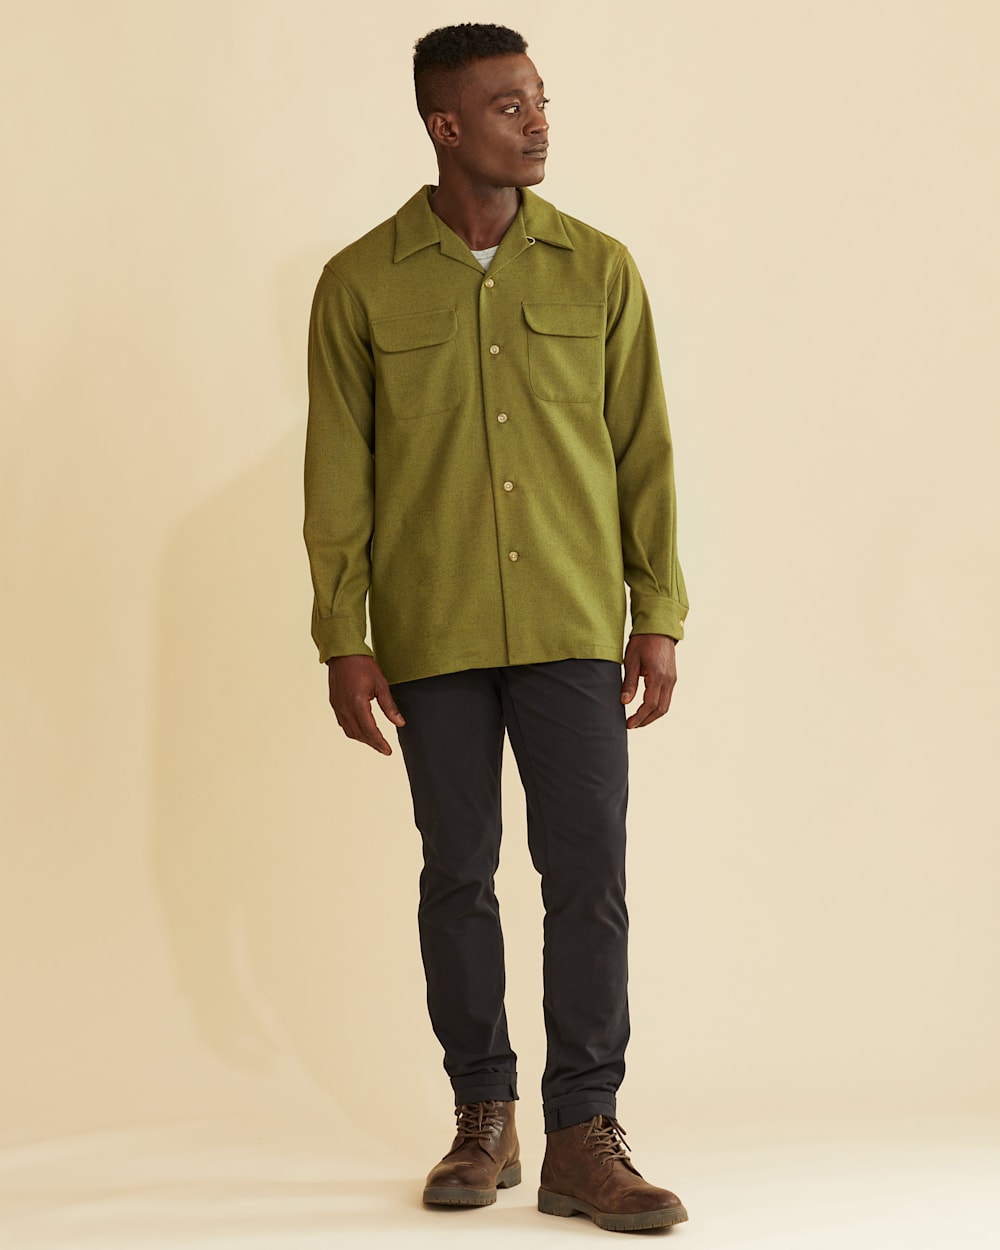 ALTERNATE VIEW OF MEN'S BOARD SHIRT IN OLIVE GREEN image number 5